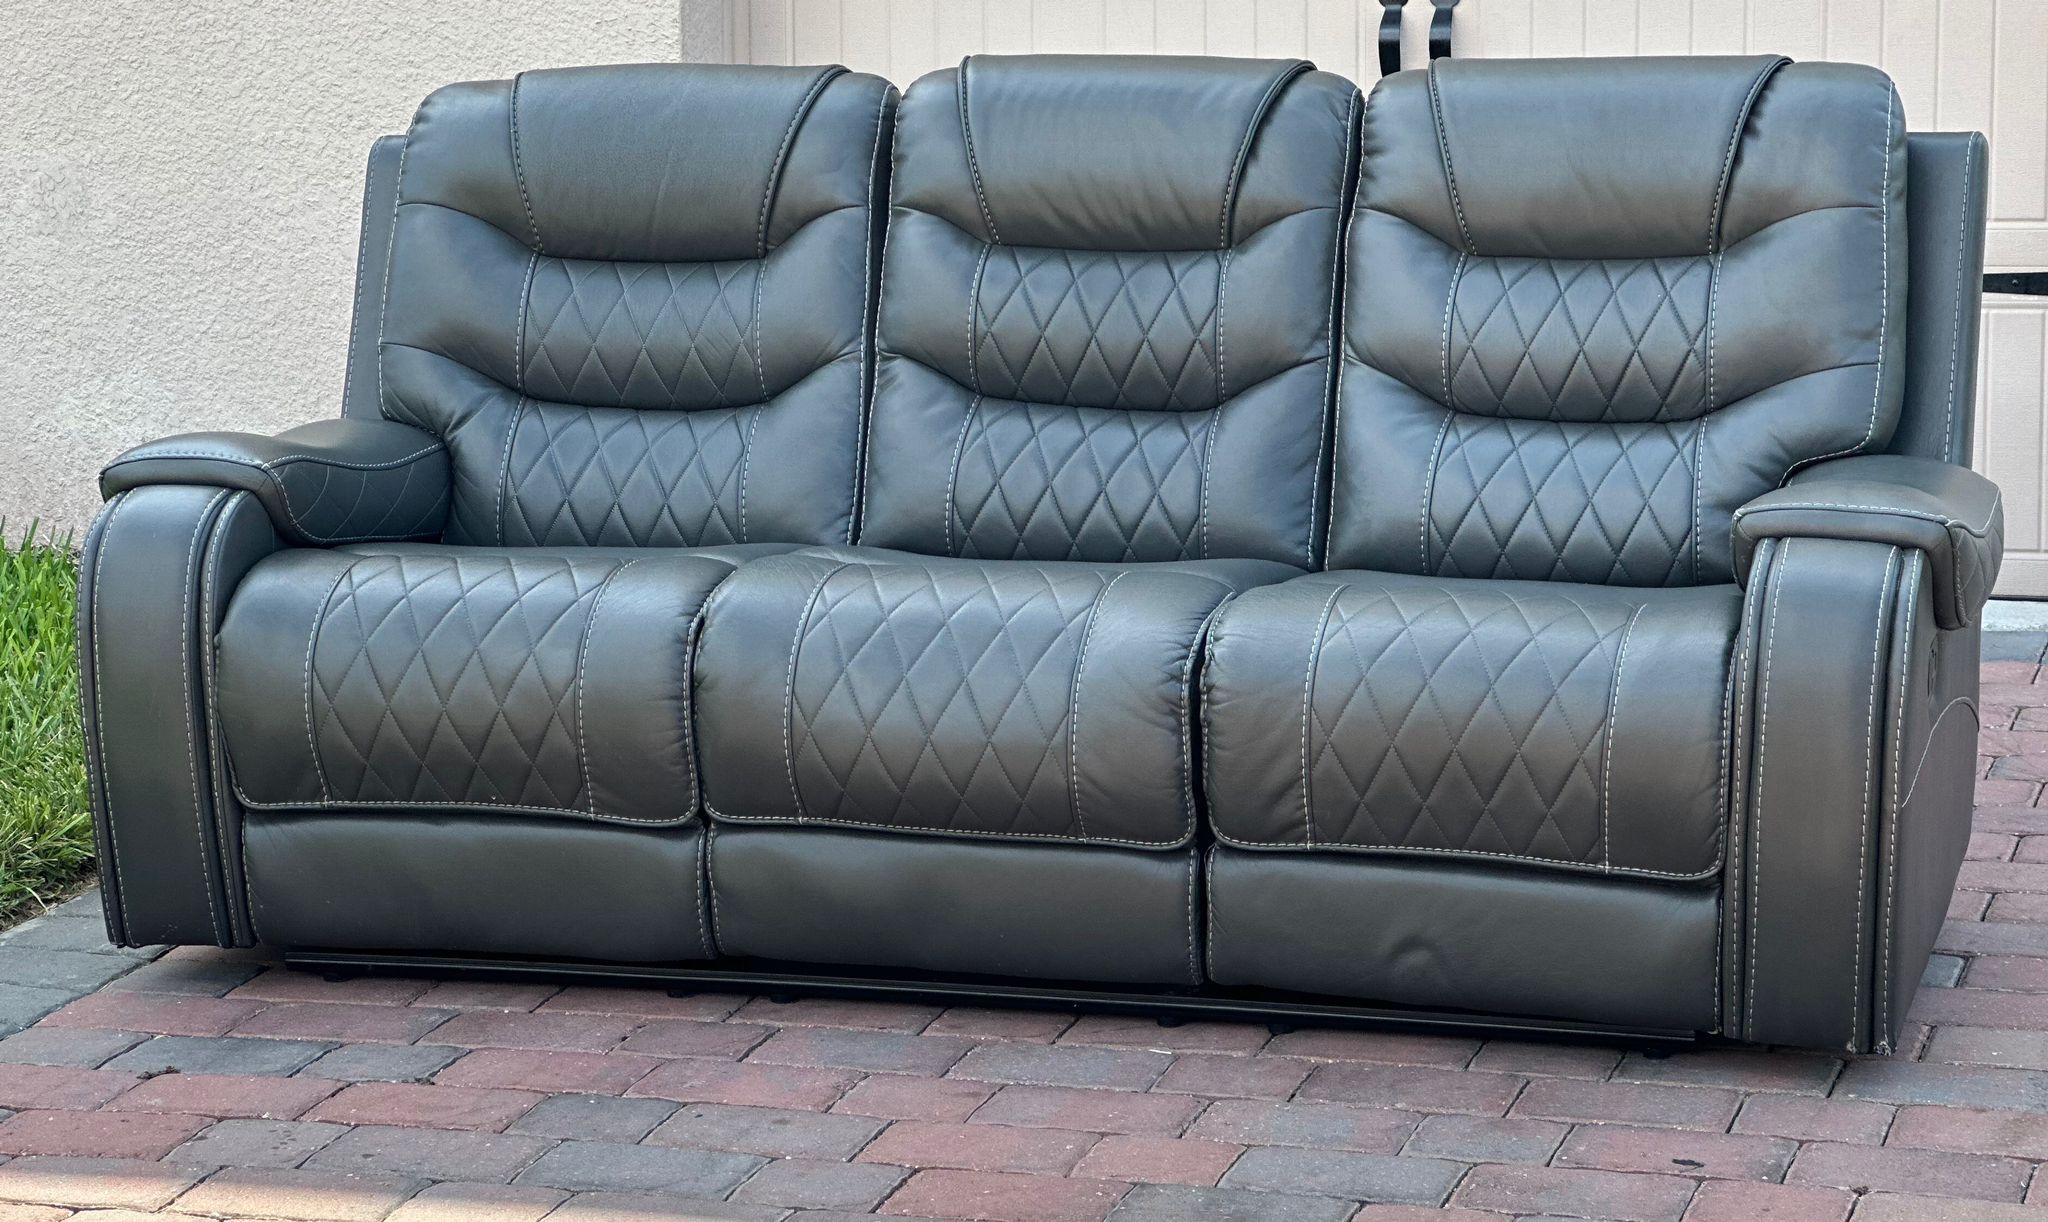 3 SEATS RECLINER SOFA IN GOOD CONDITION - FAUX LEATHER - MANUAL RECLINER - DELIVERY AVAILABLE 🚚